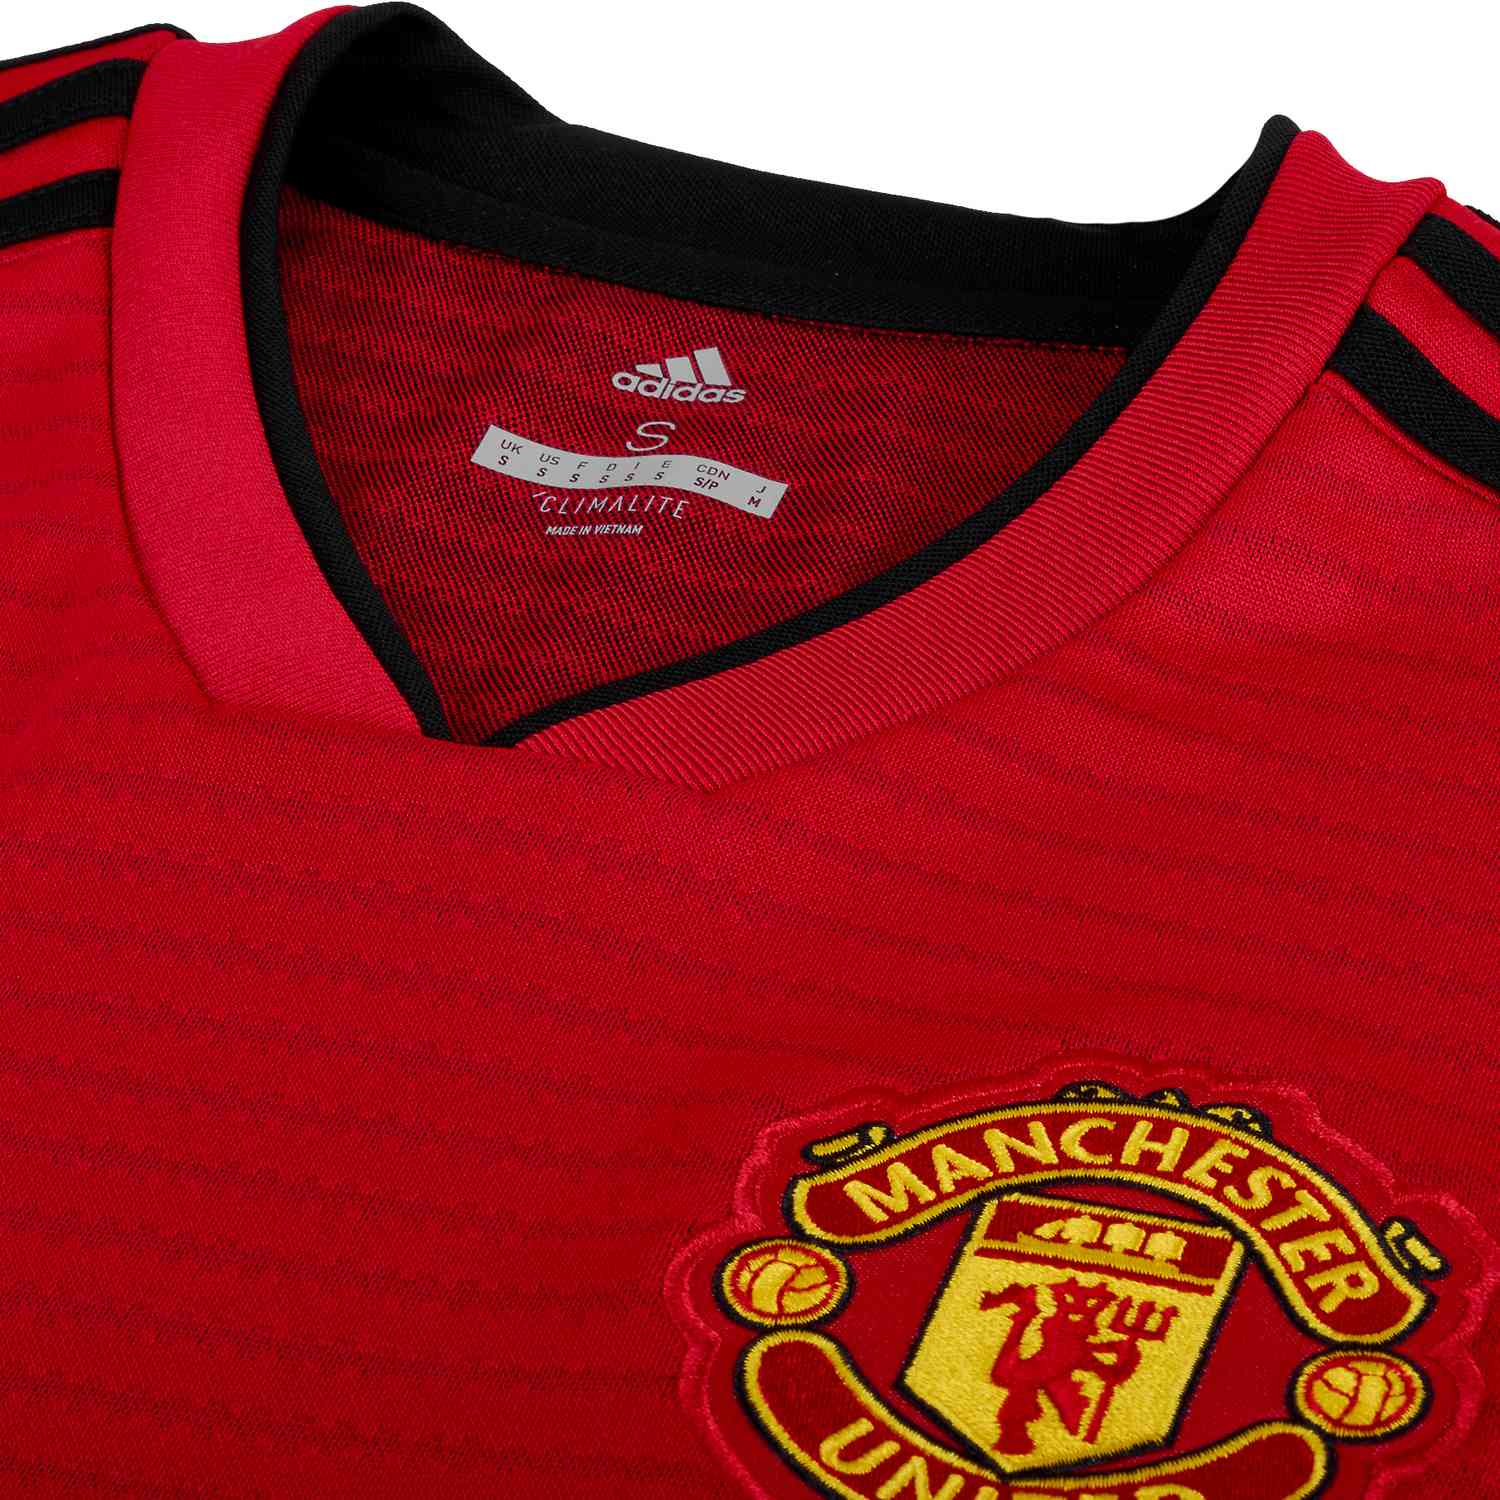 2018/19 adidas Manchester Home - Soccer Master